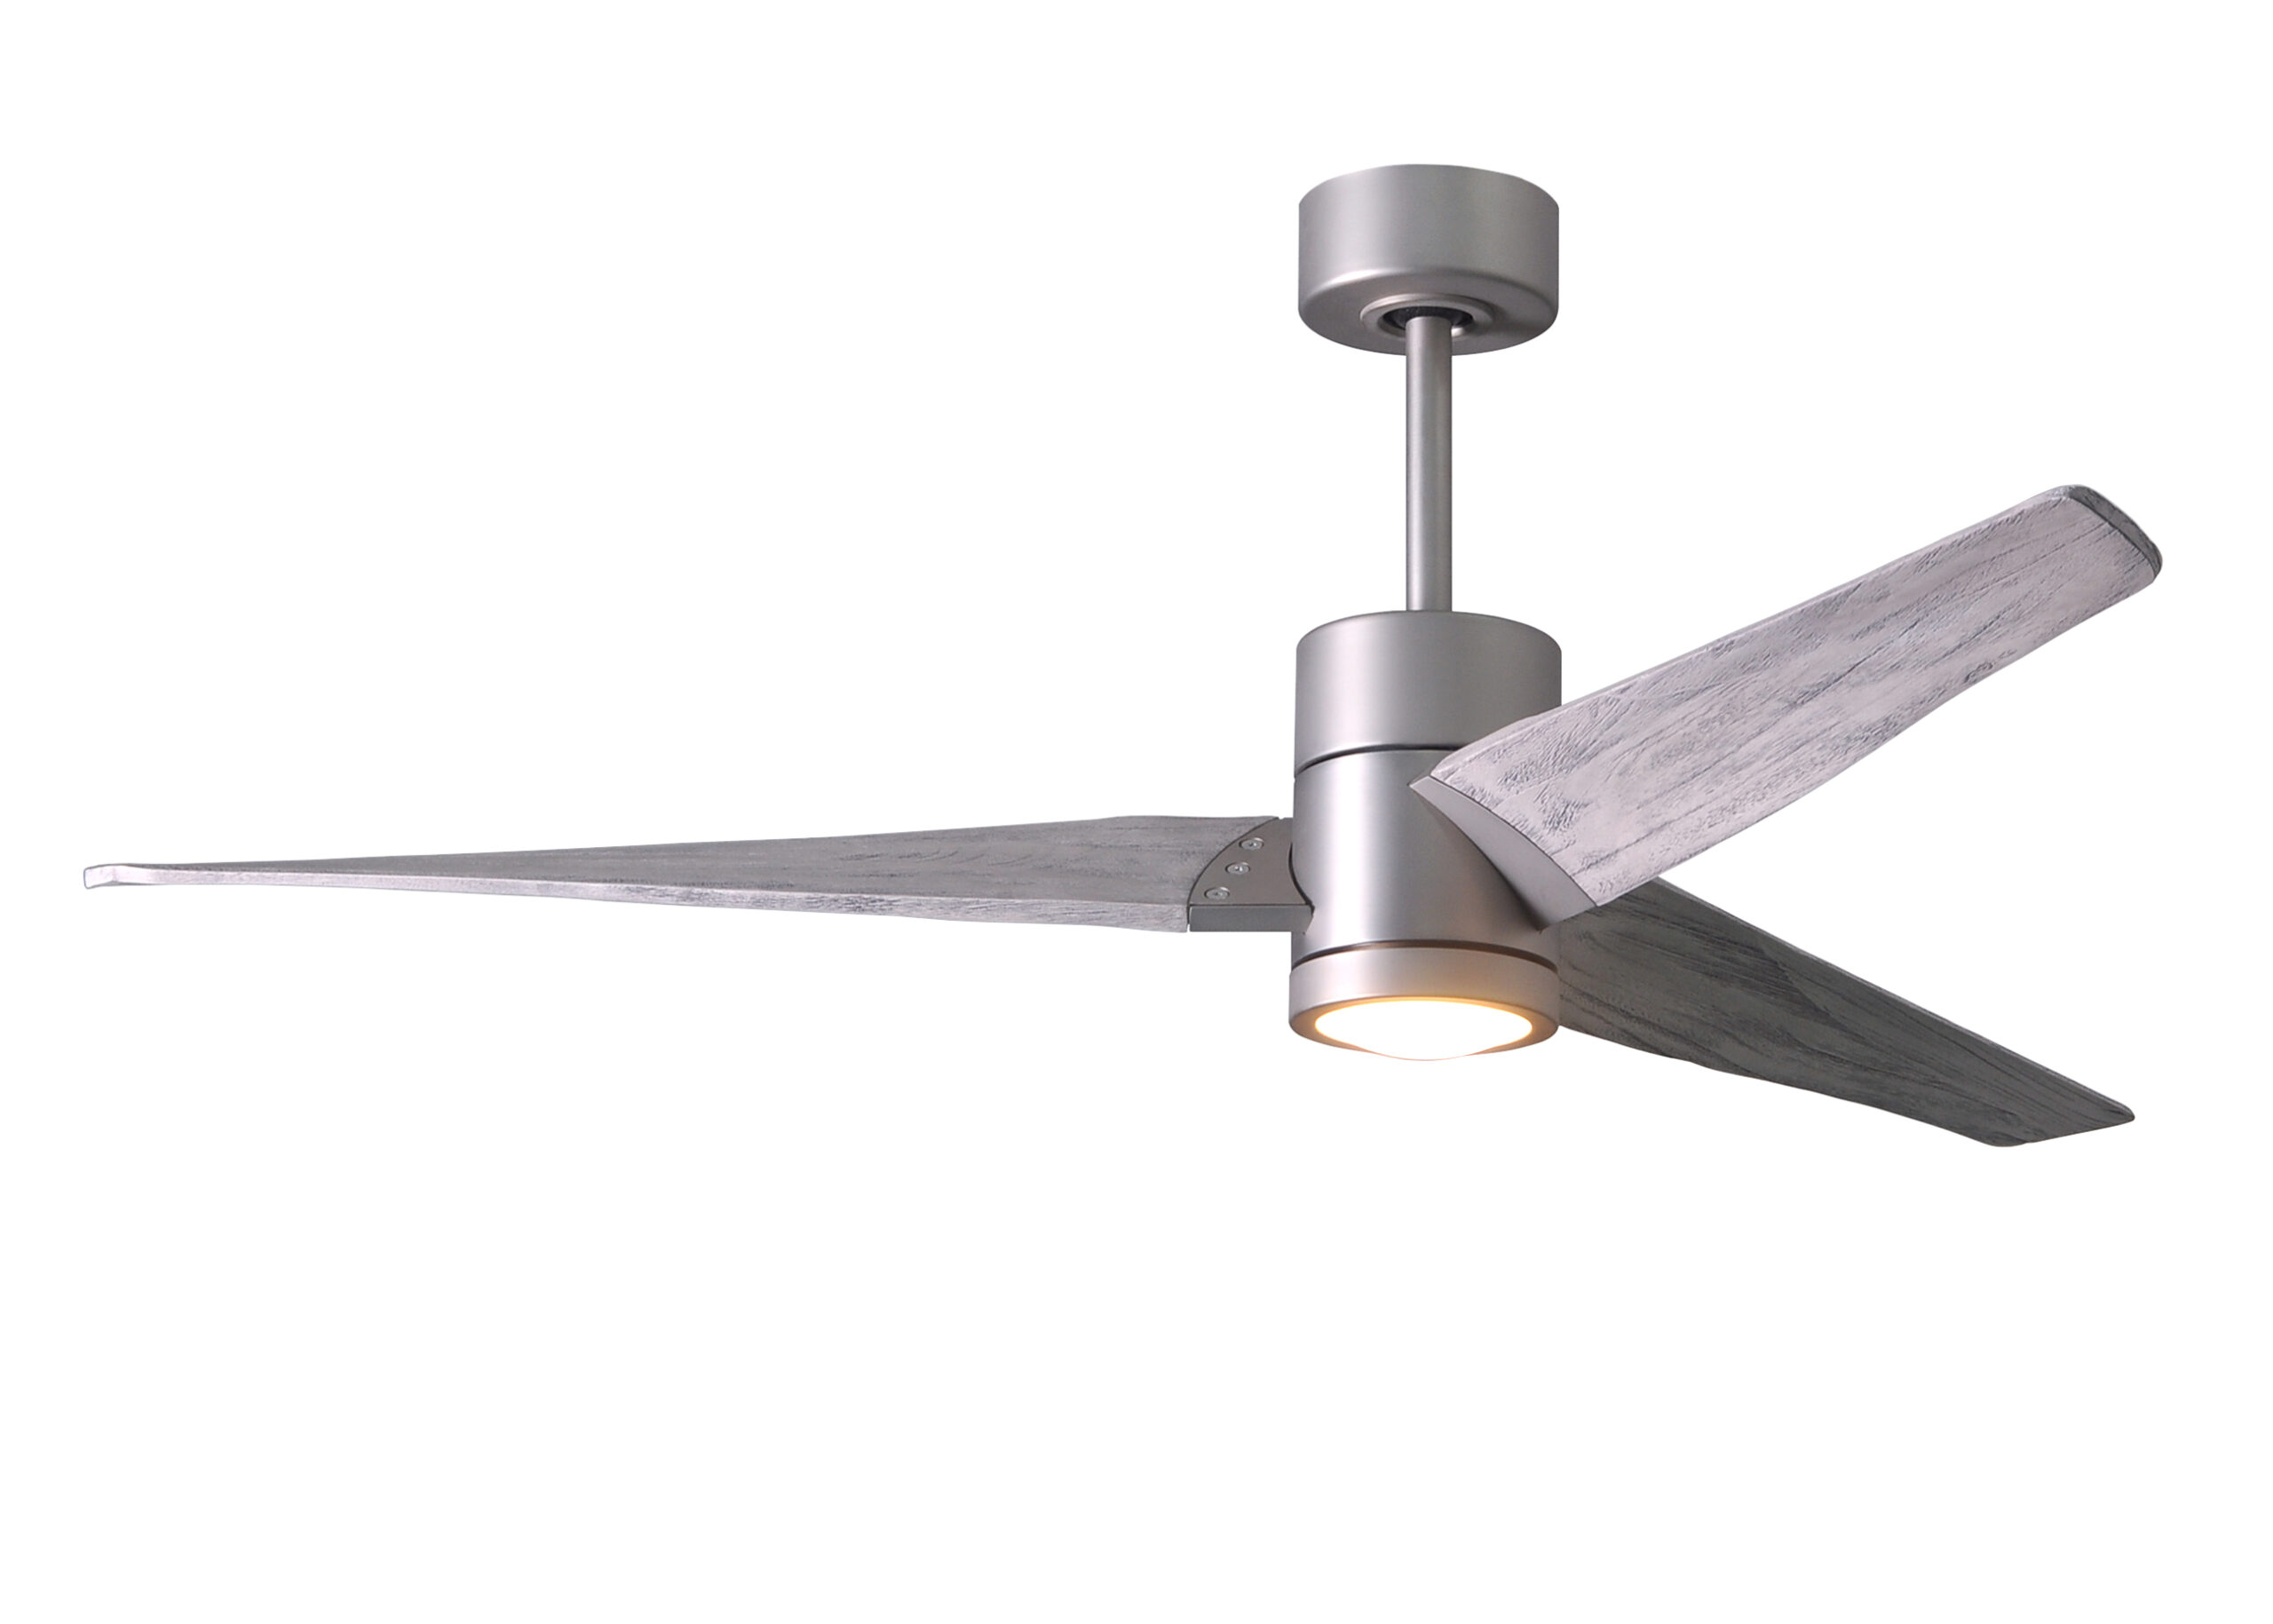 Super Janet Ceiling Fan in Brushed Nickel with 60” Barn Wood Blades